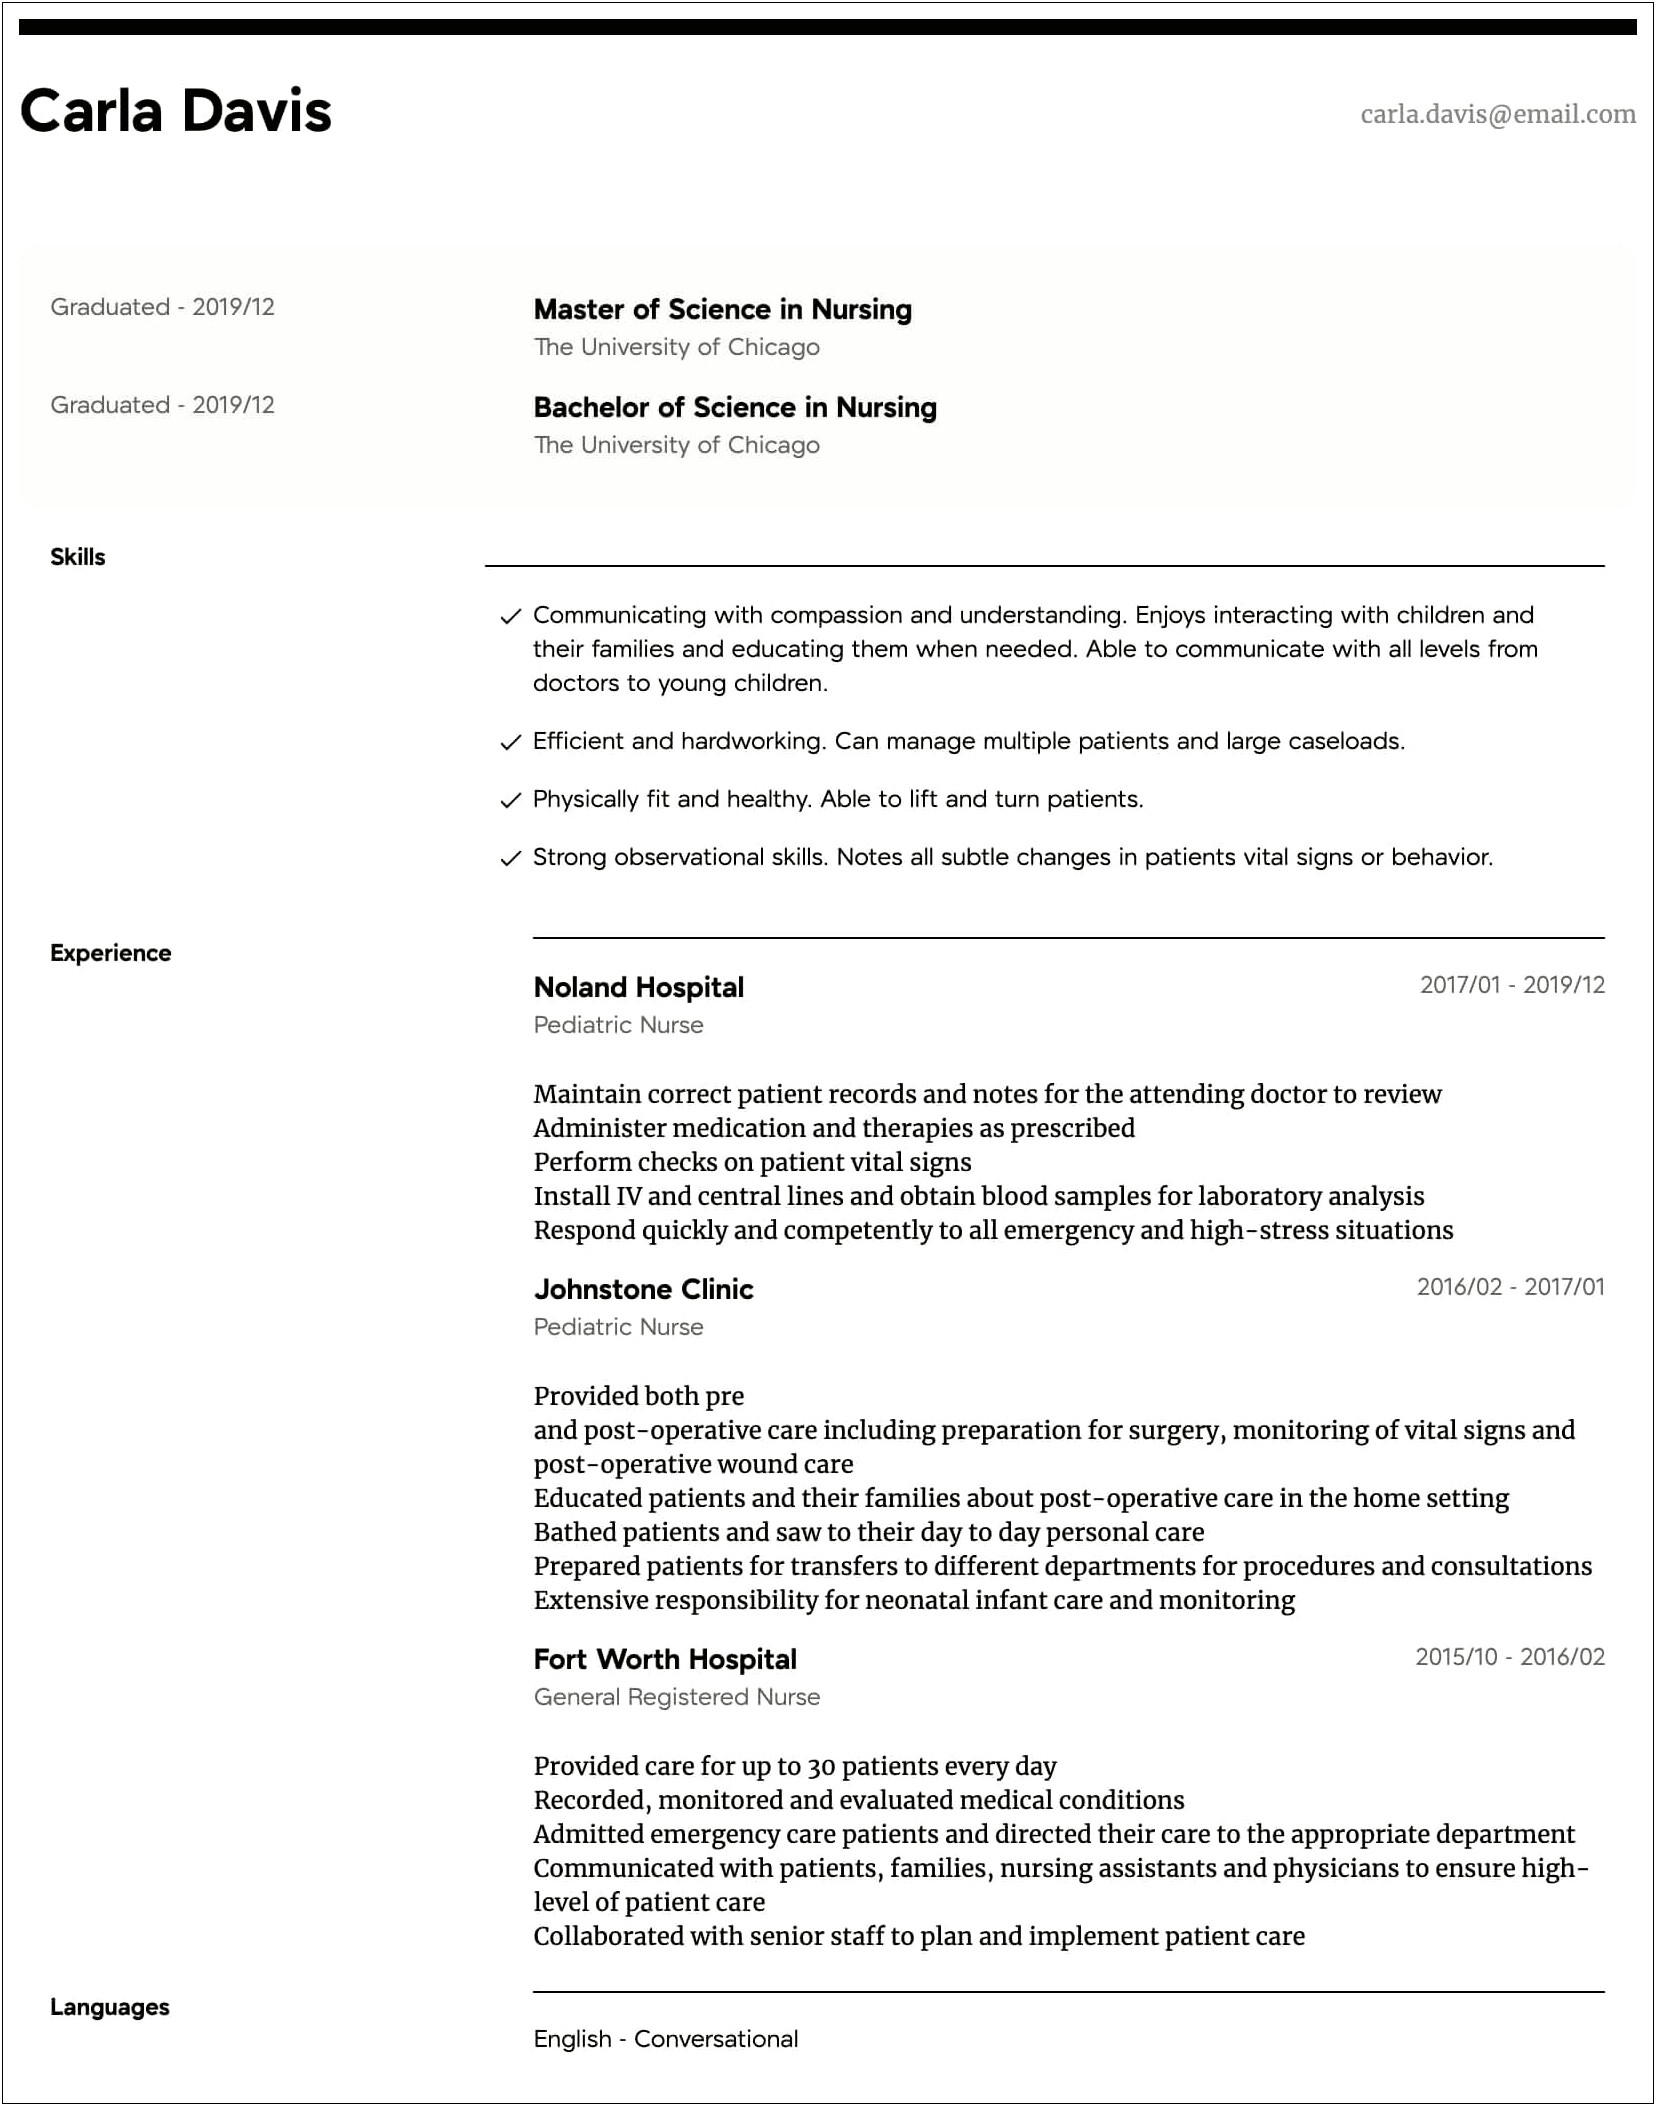 Examples Of Qualifications For Nursing Resumes